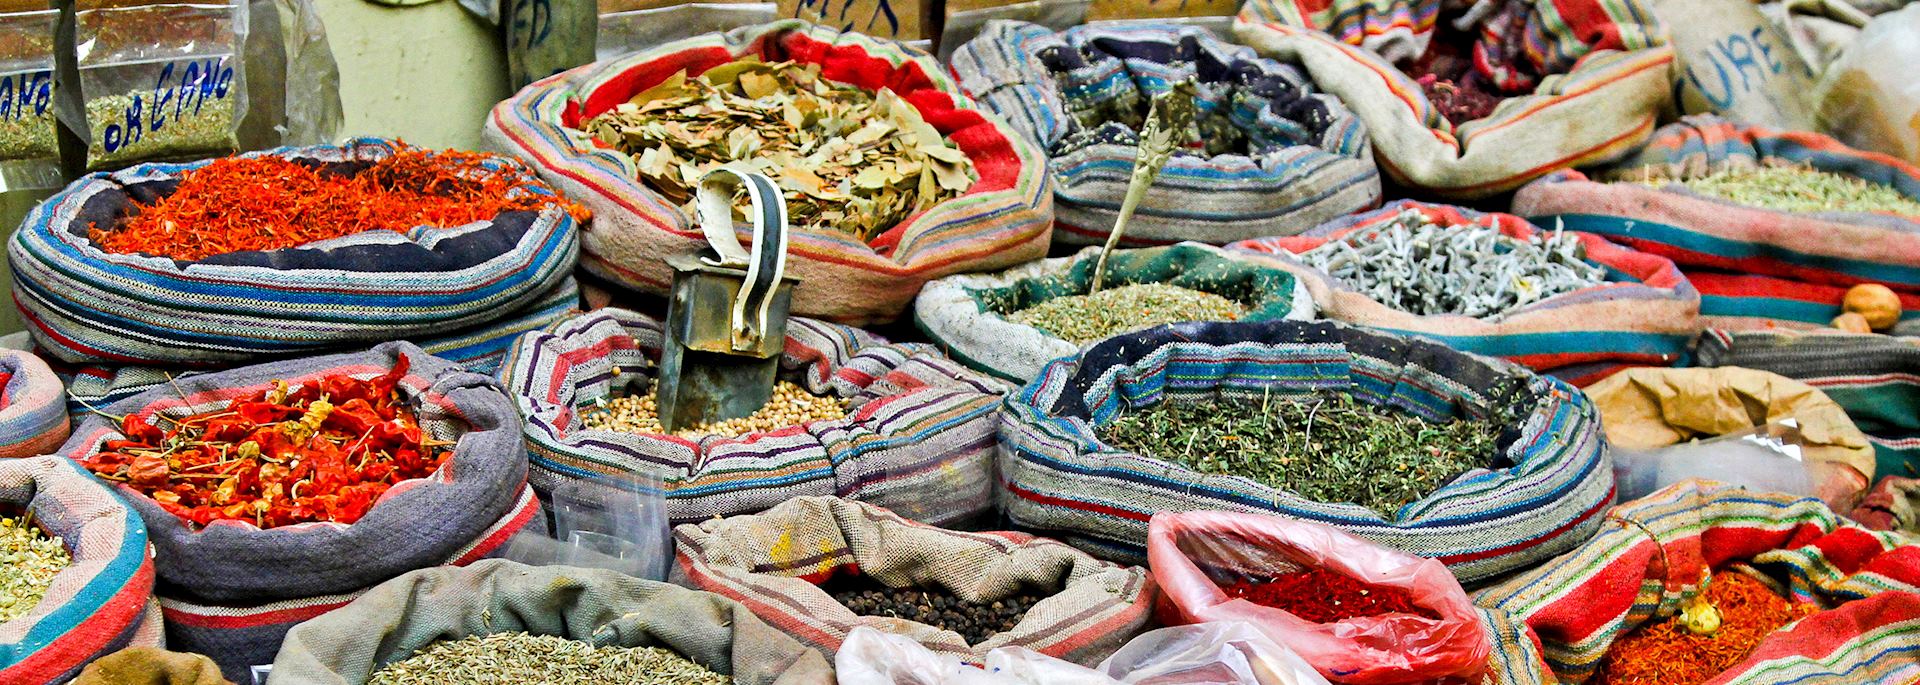 Cairo market selling spices